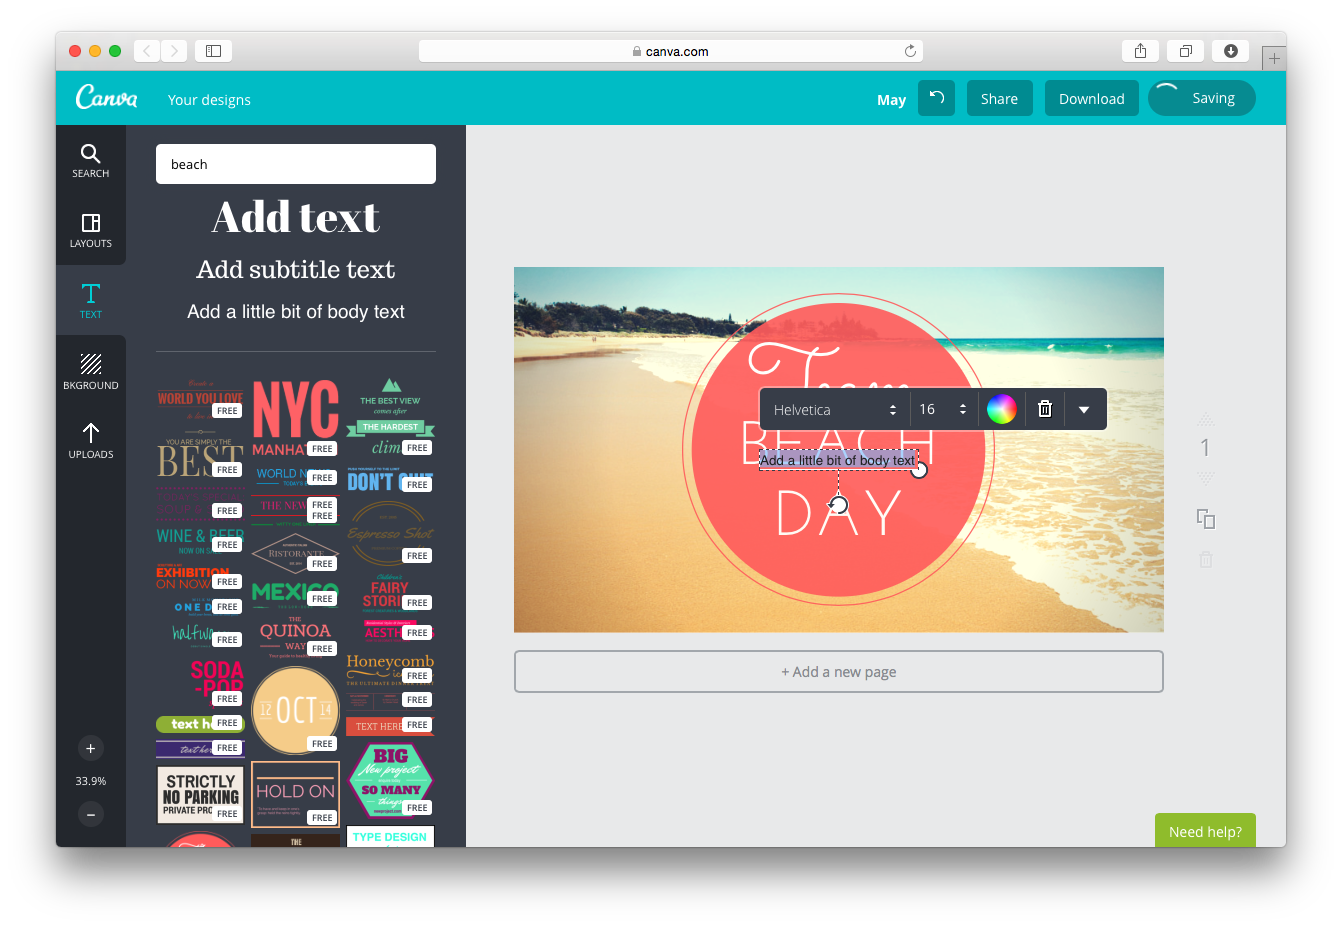 Adding text in Canva